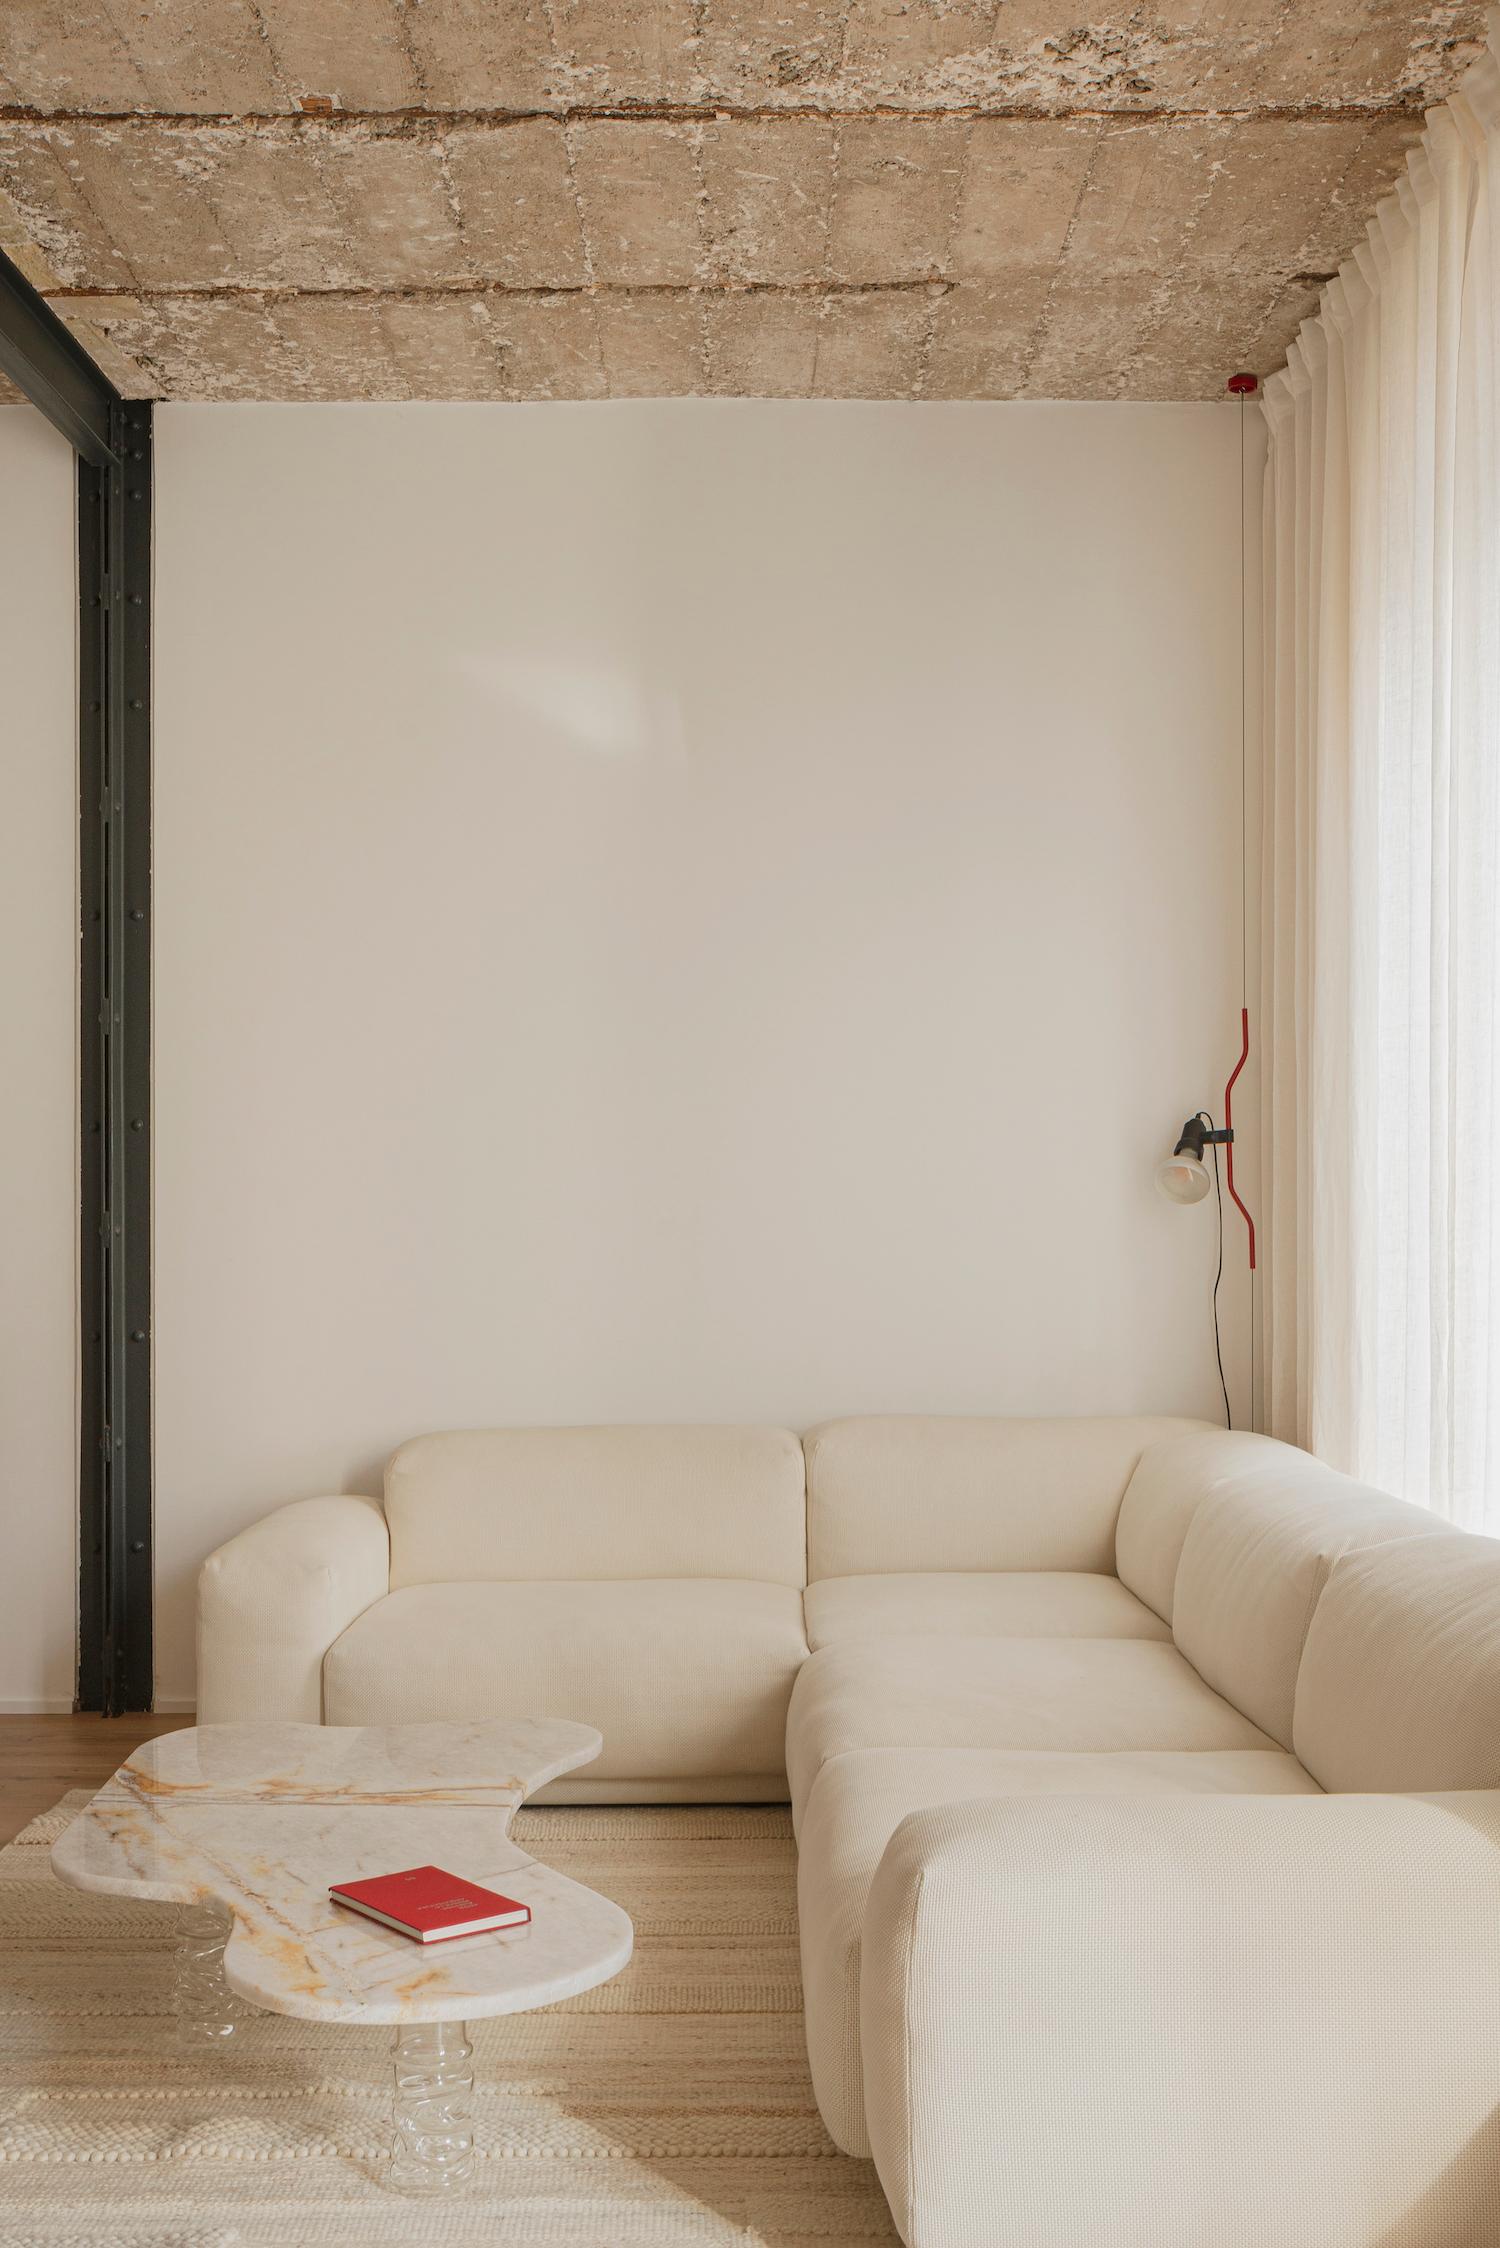 1950s Apartment in Valencia renovated by Xarquitectos